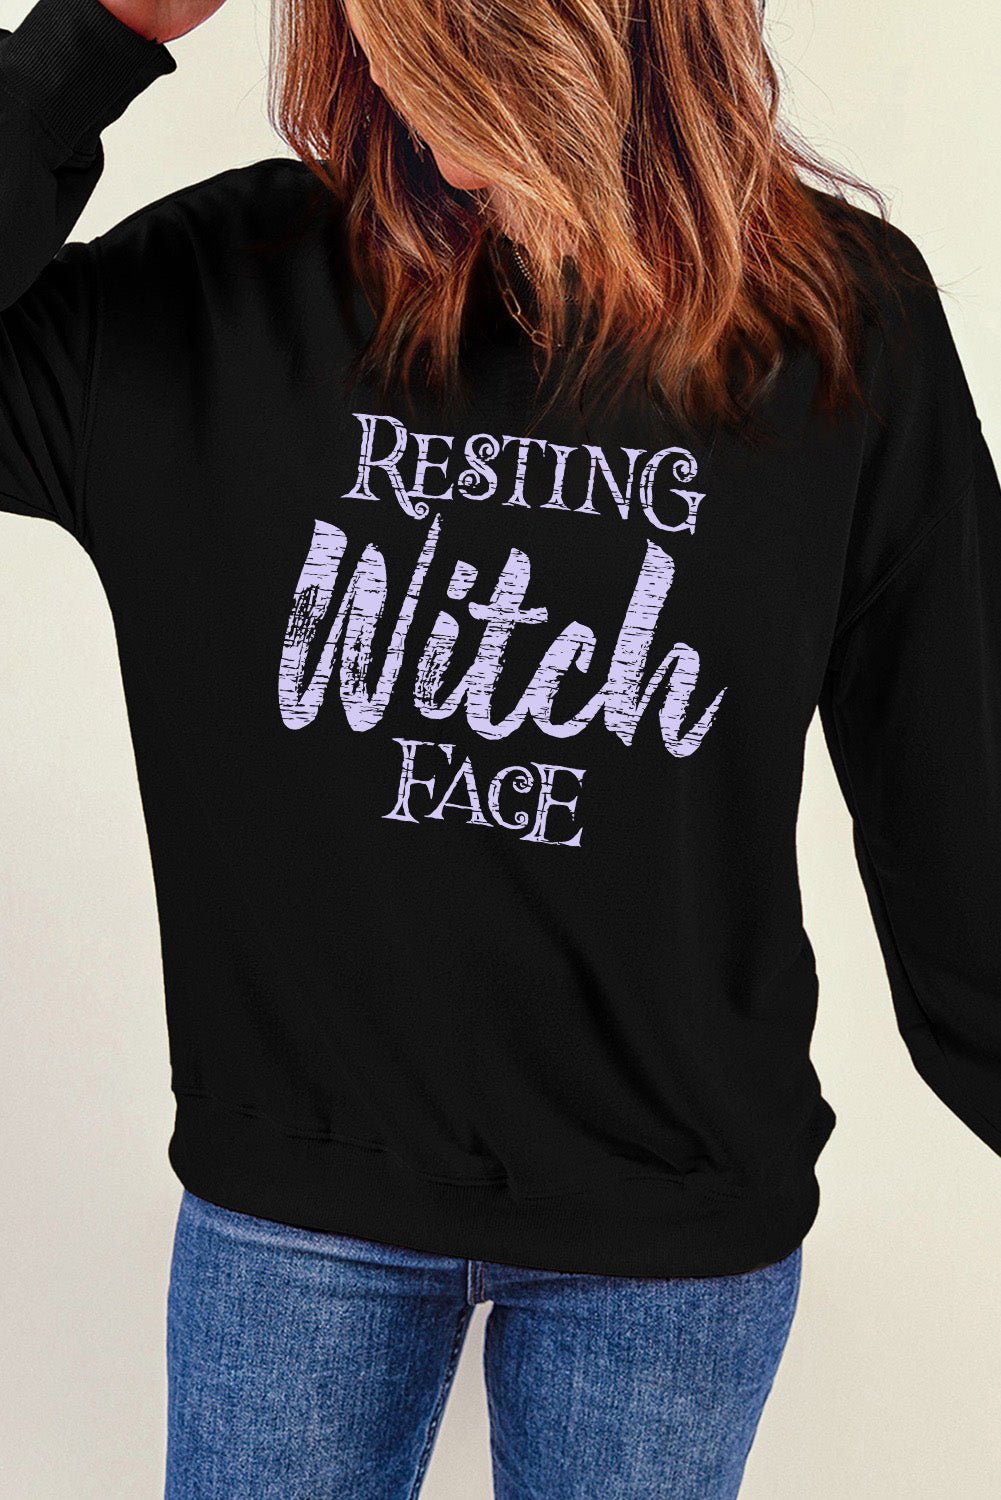 Round Neck Long Sleeve RESTING WITCH FACE Graphic Sweatshirt - Guy Christopher